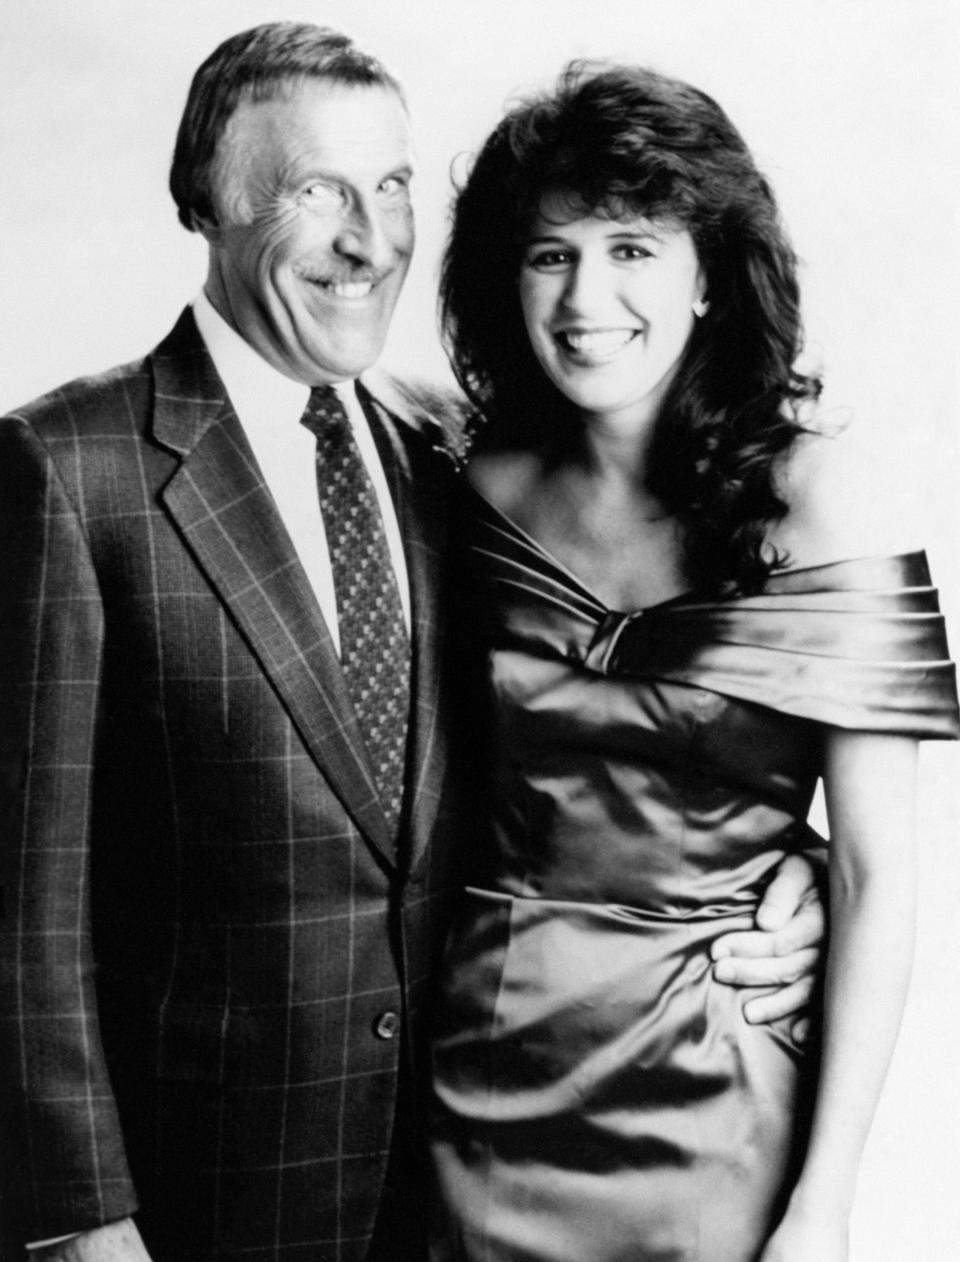 Bruce Forsyth and Rosemary Ford